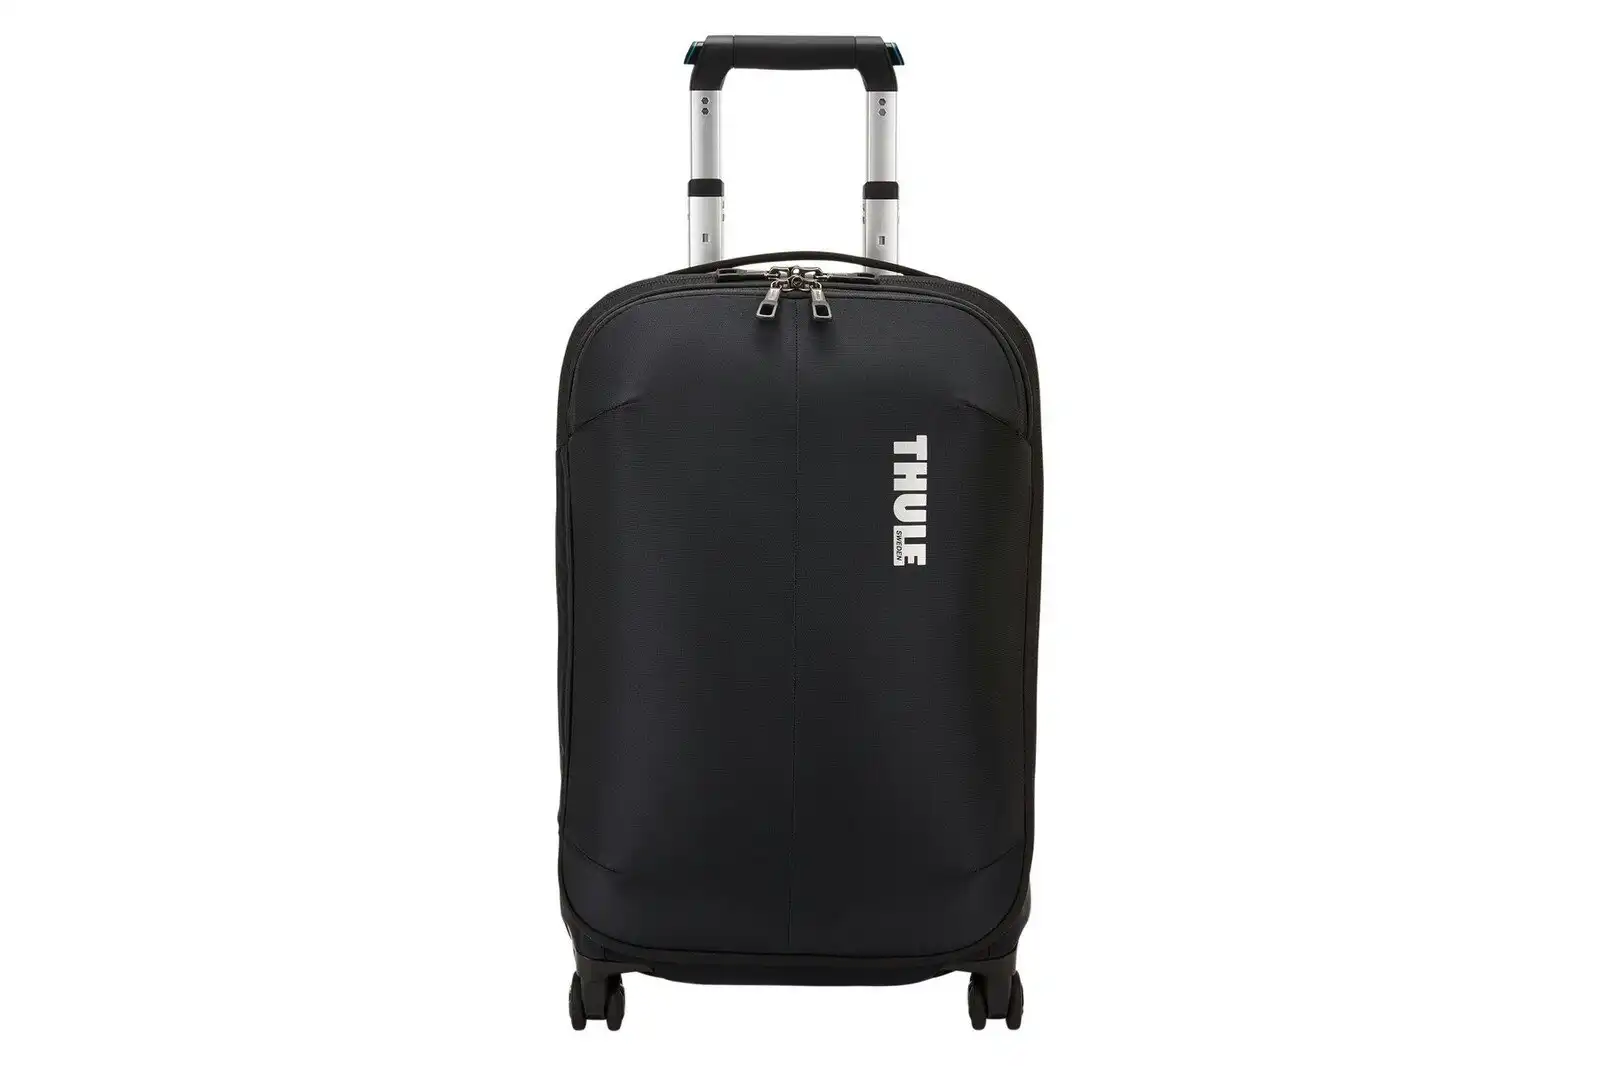 Thule Subterra 33L/55cm Carry On Spinner Travel Luggage Suitcase Wheeled Bag BLK